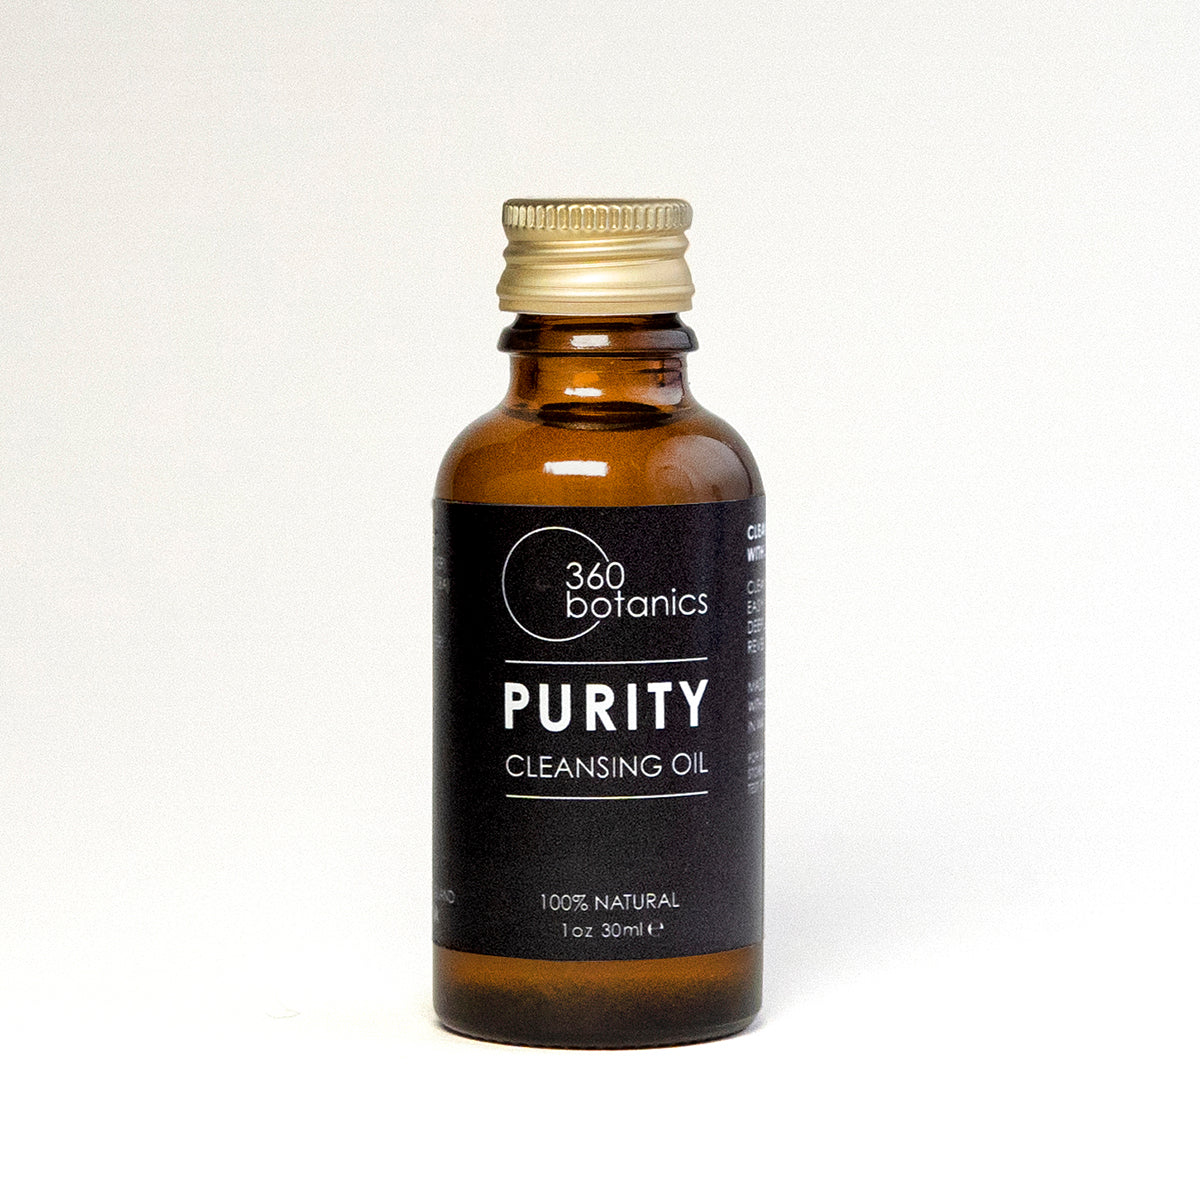 A bottle of 360 Botanics Purity Cleansing Oil on a neutral background, with a gold cap and clear labeling that reads '100% Natural, 1oz 30ml'. The simple and clean design conveys the product's natural ingredients and eco-friendly philosophy